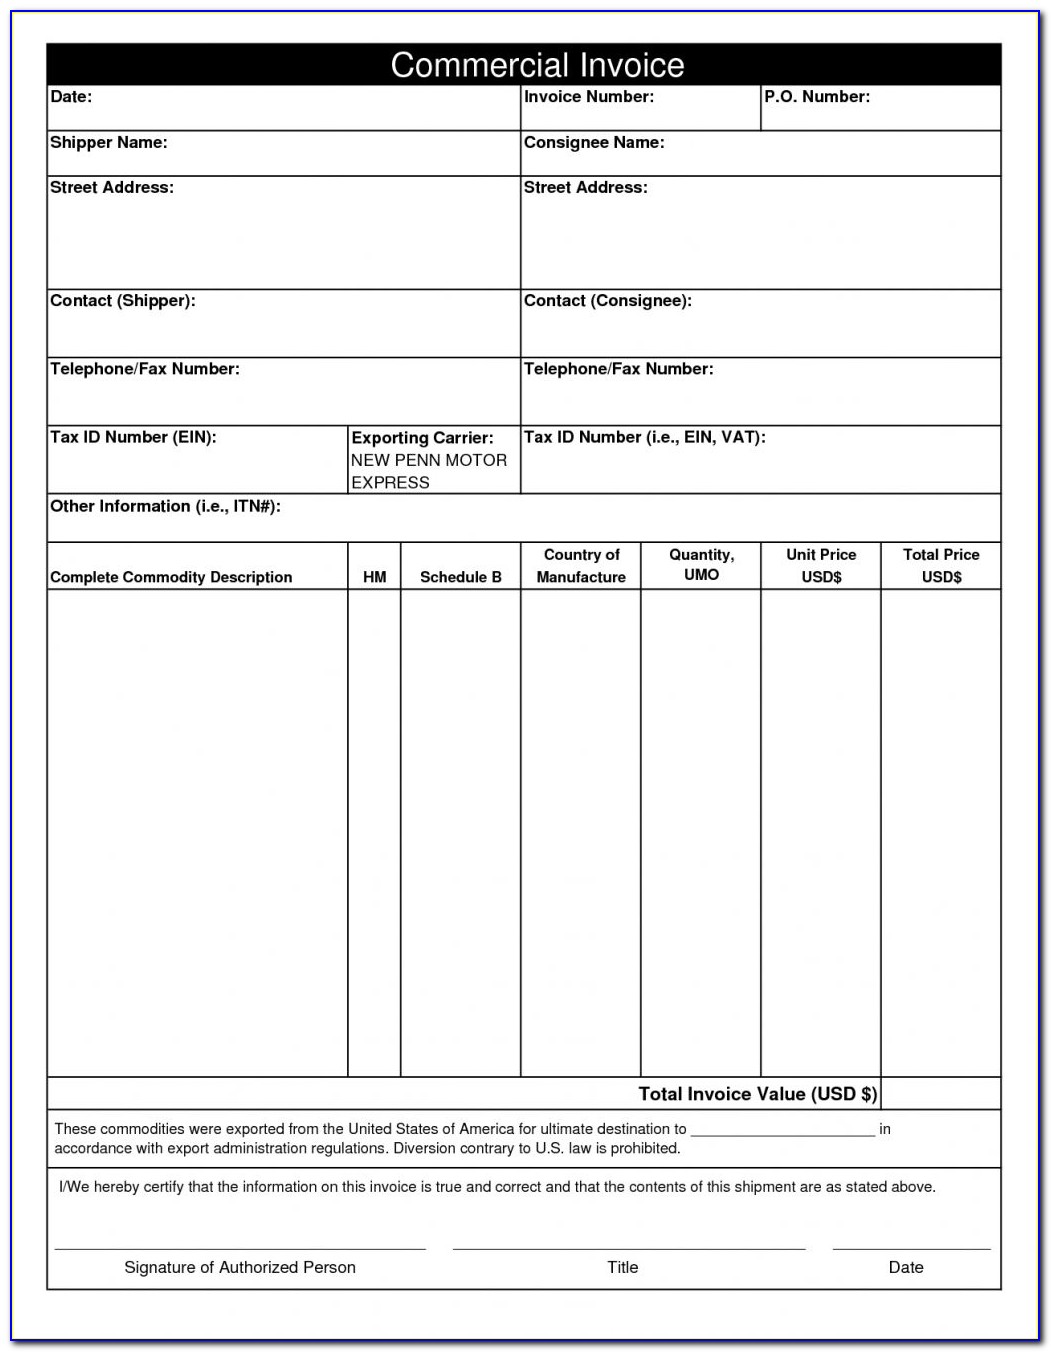 Ups Commercial Invoice Fillable Form Invoicegenerator Commercial Invoice Pdf Fillable